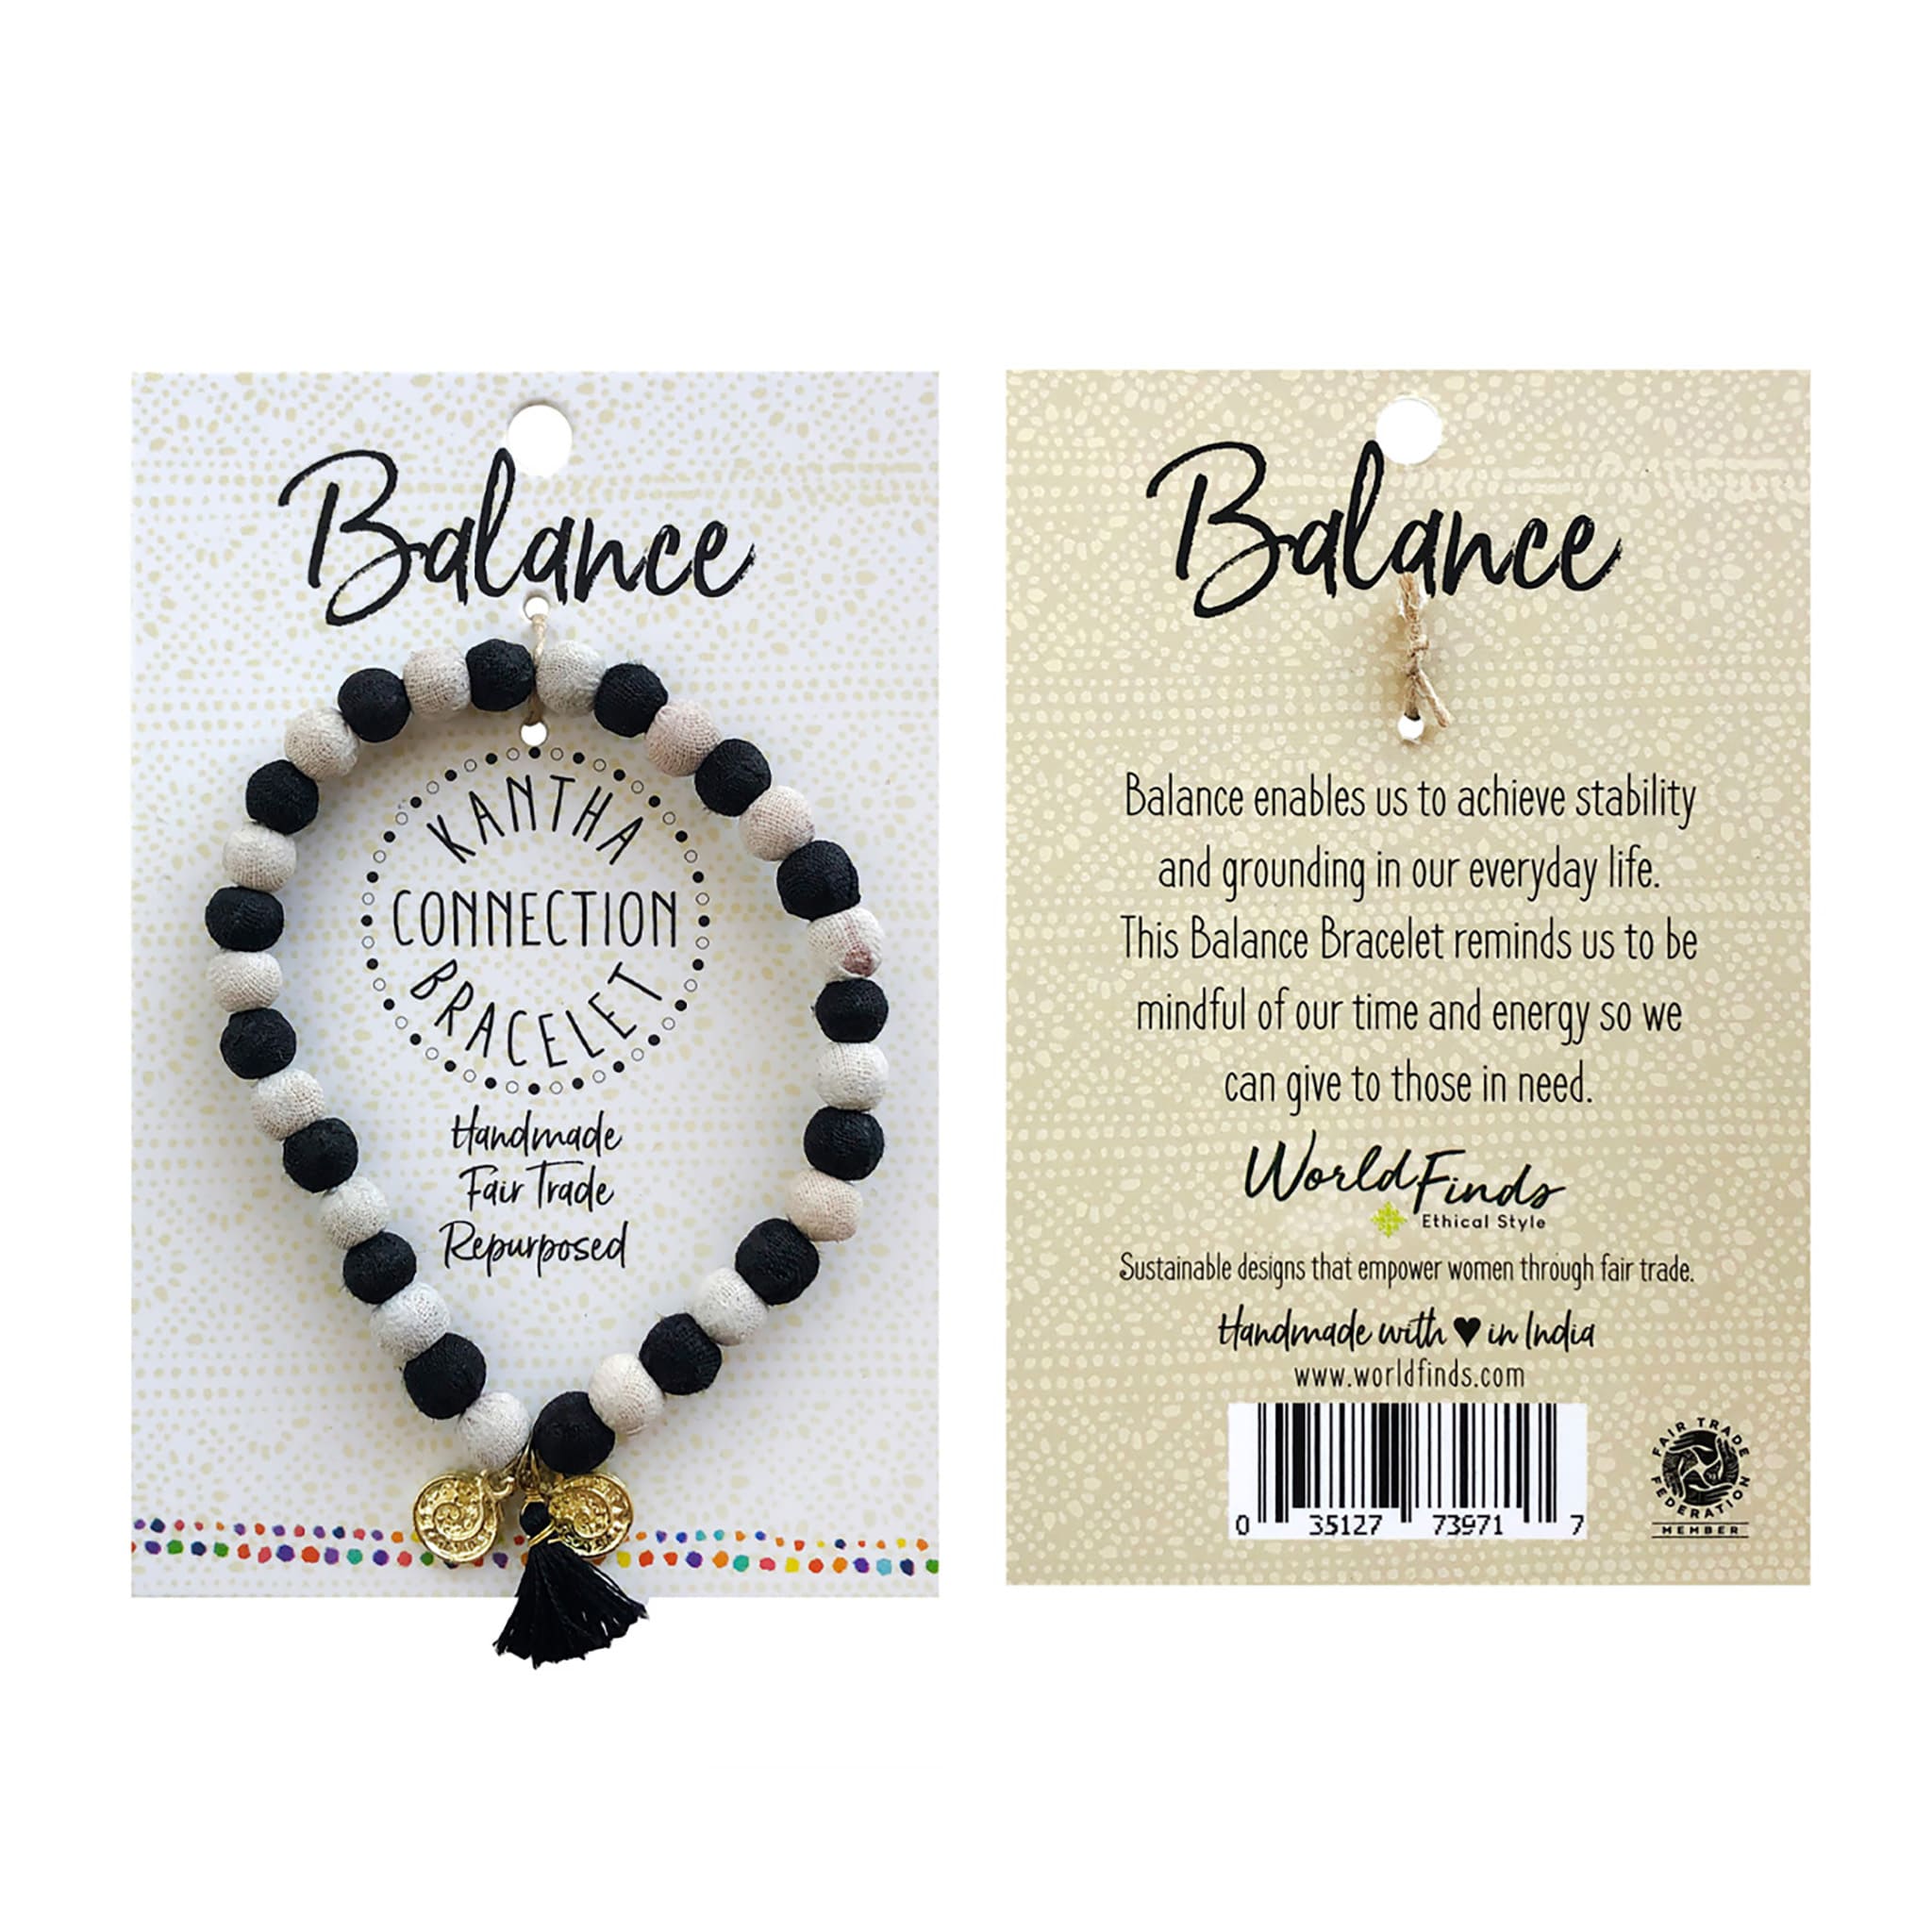 The front and back of the carded Balance bracelet is shown